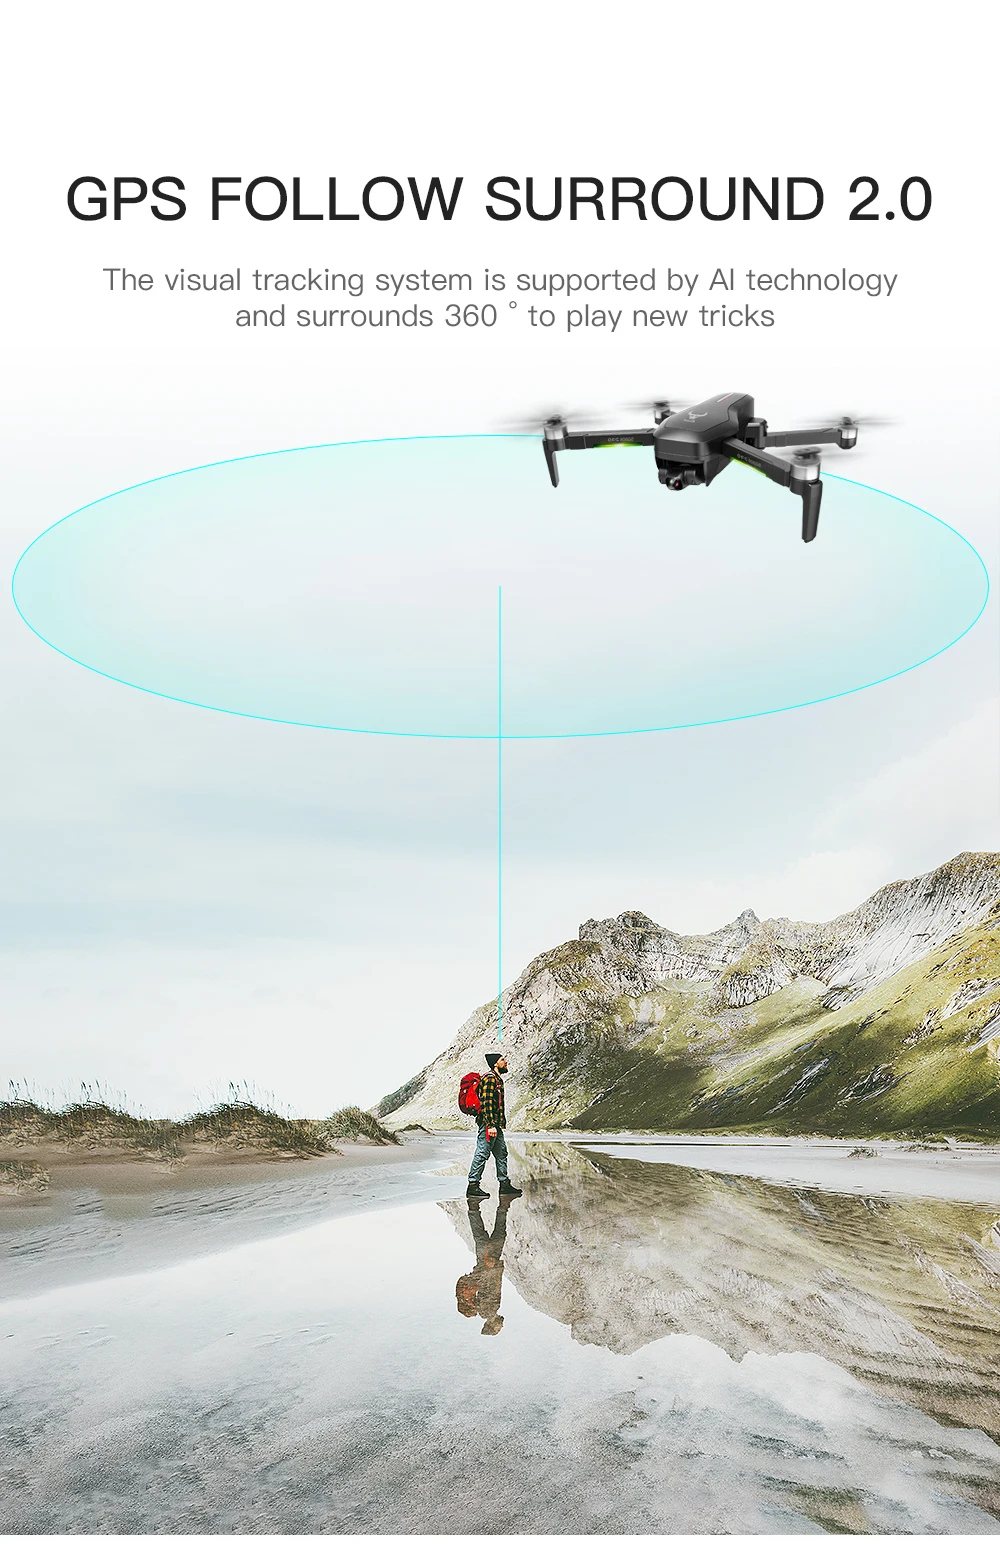 Pro 2 Drone 4k HD mechanical 3-Axis gimbal camera 5G wifi gps system